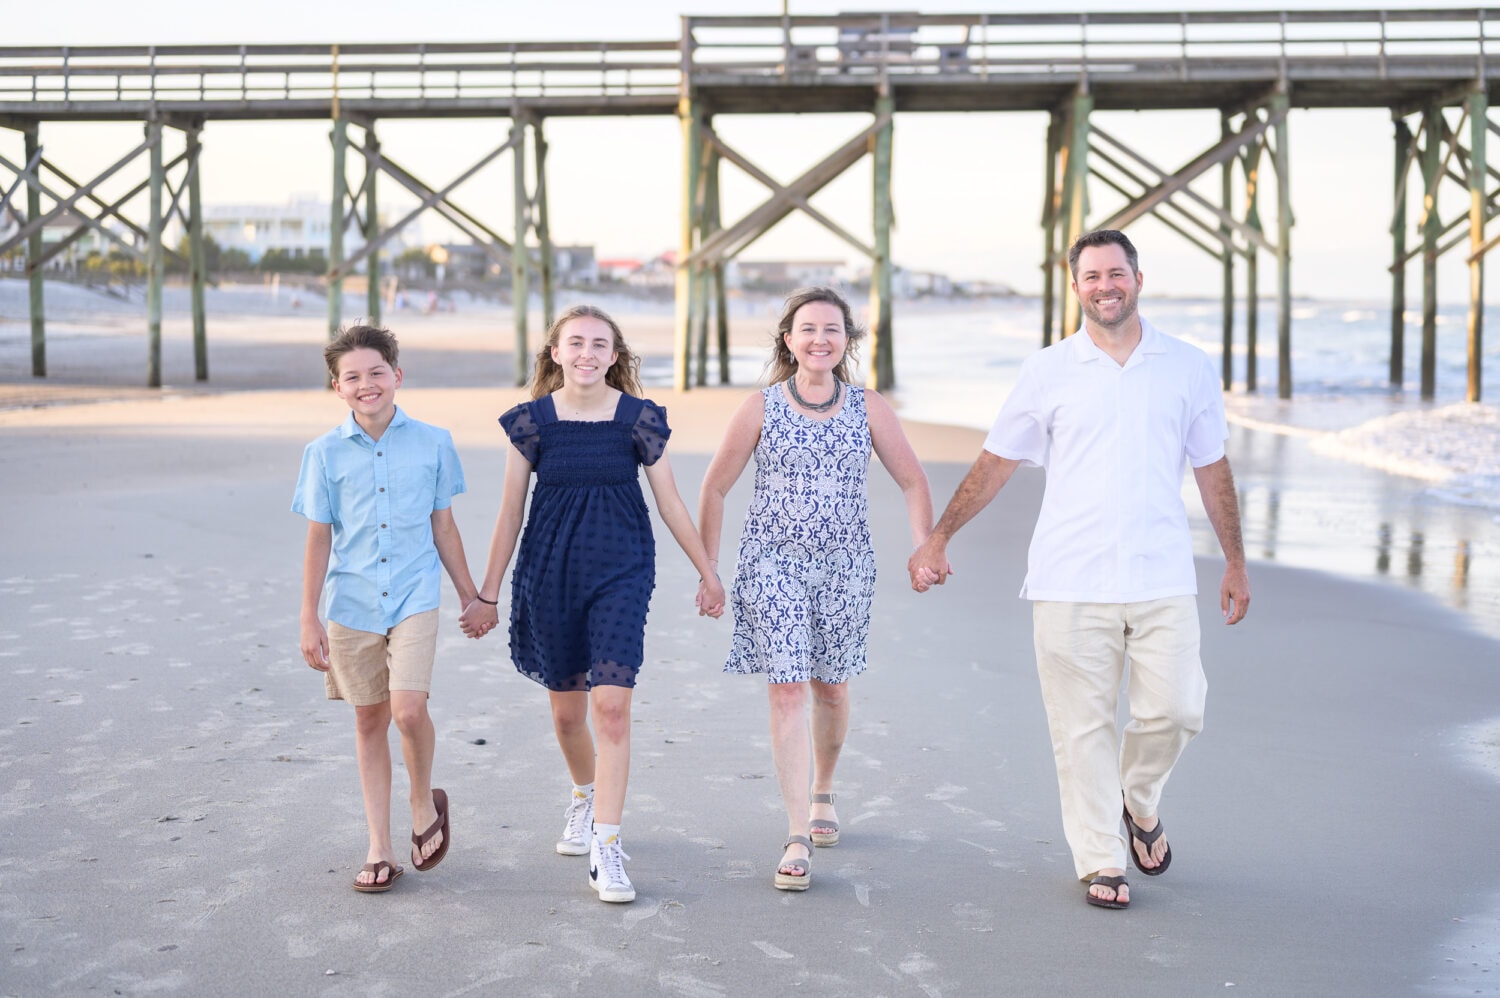 Family of 4 having a lot of fun together - Pawleys Island